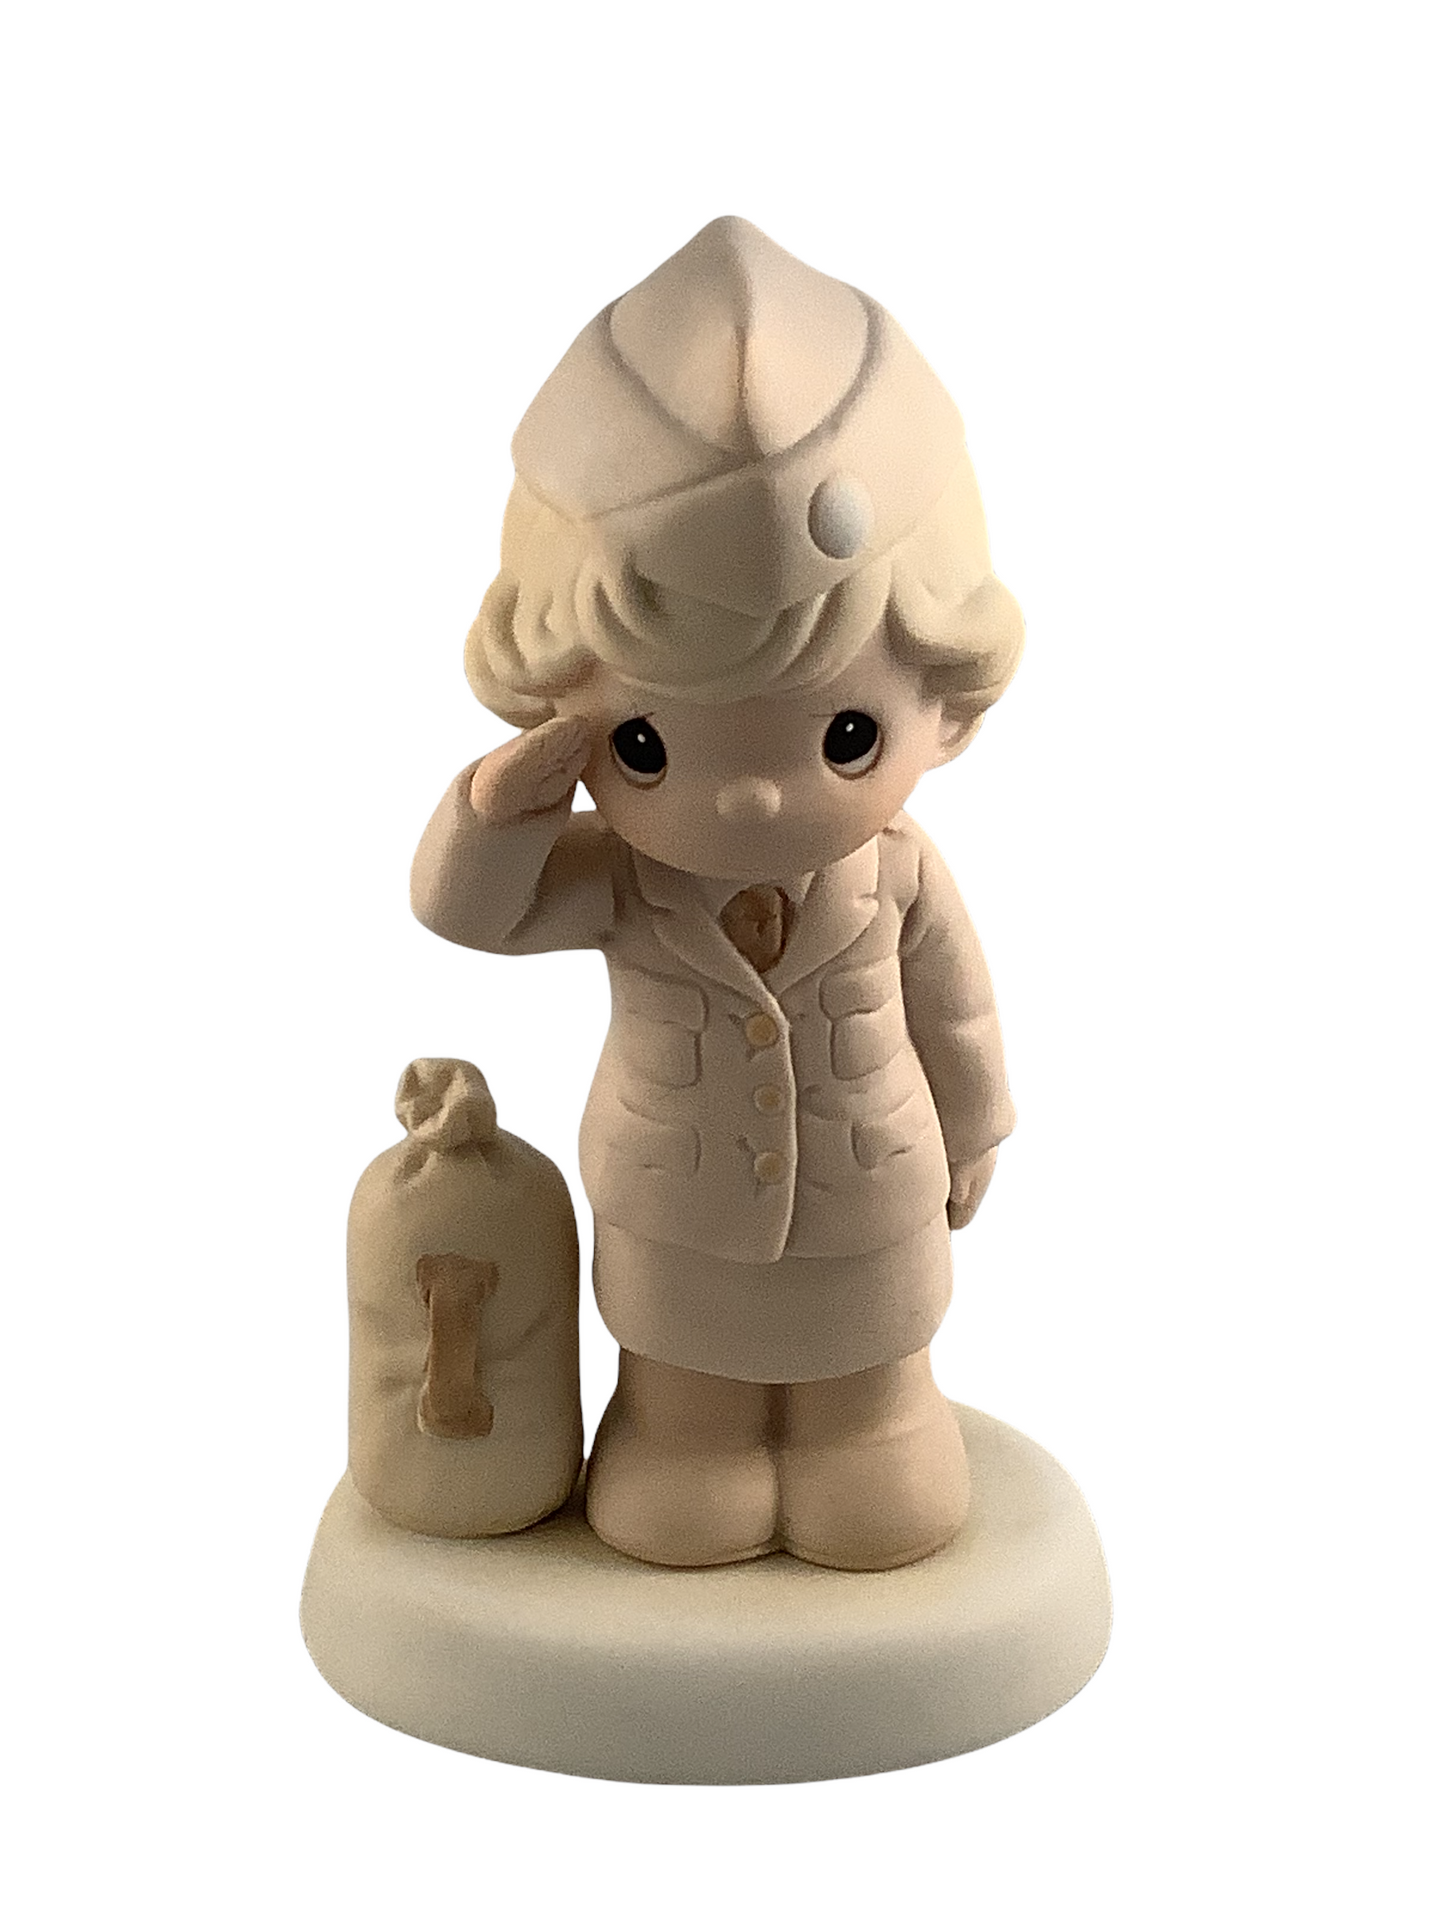 Bless Those Who Serve Their Country - Girl Soldier- Precious Moment Figurine